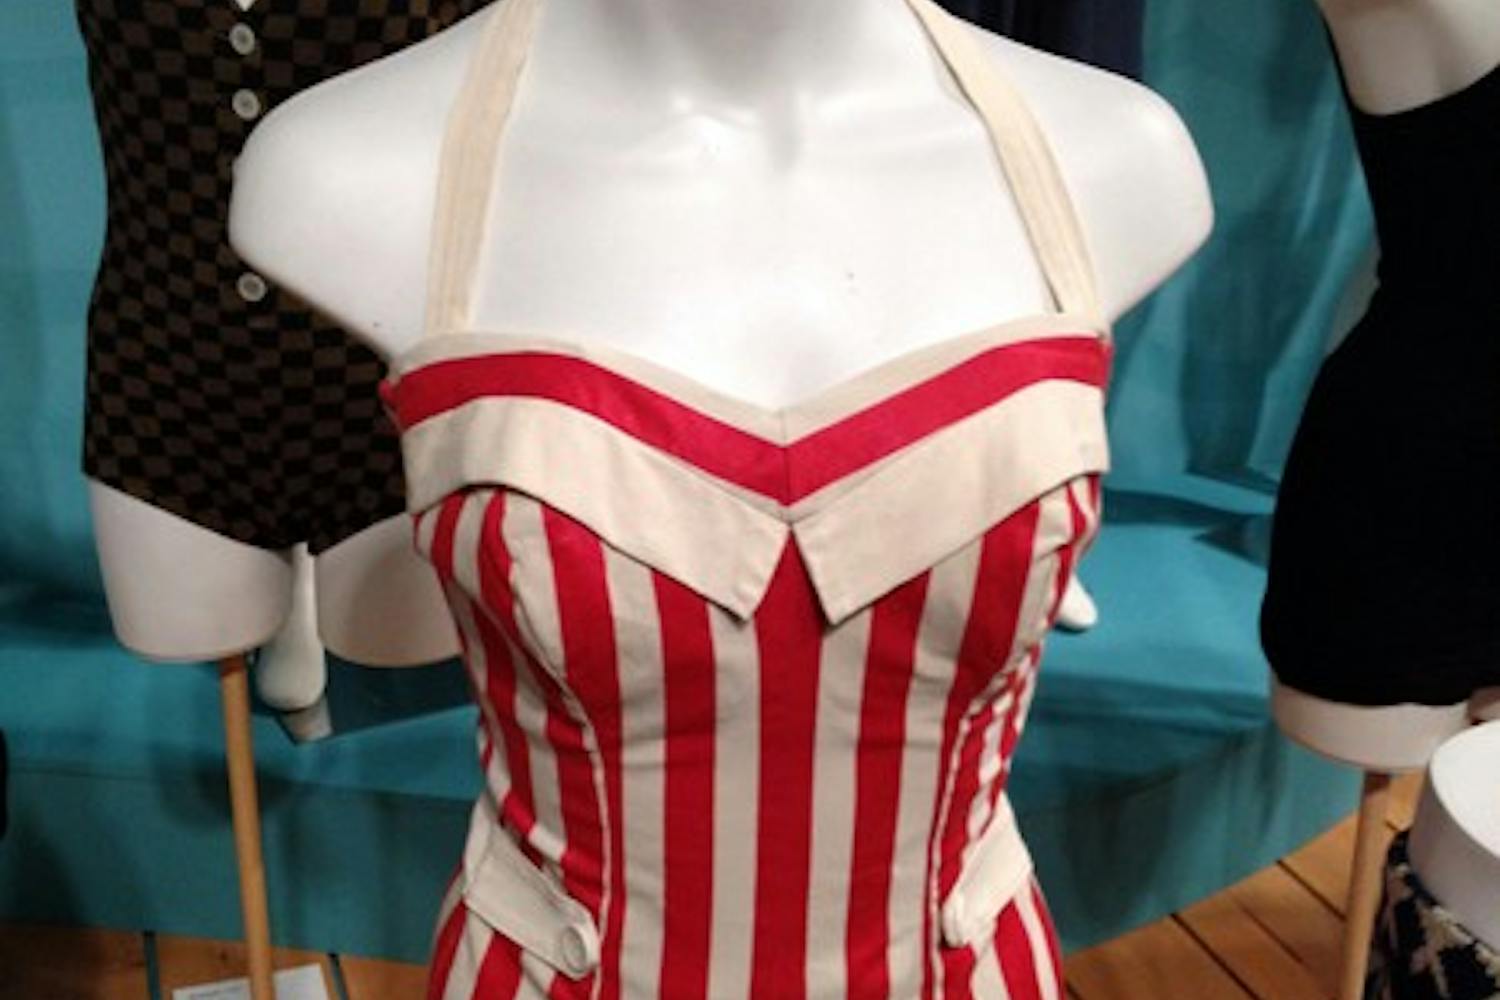 A swimsuit from the mid-1900s shows the evolution of swimsuits in "The Sea" exhibit. (Photo by William Hamilton)